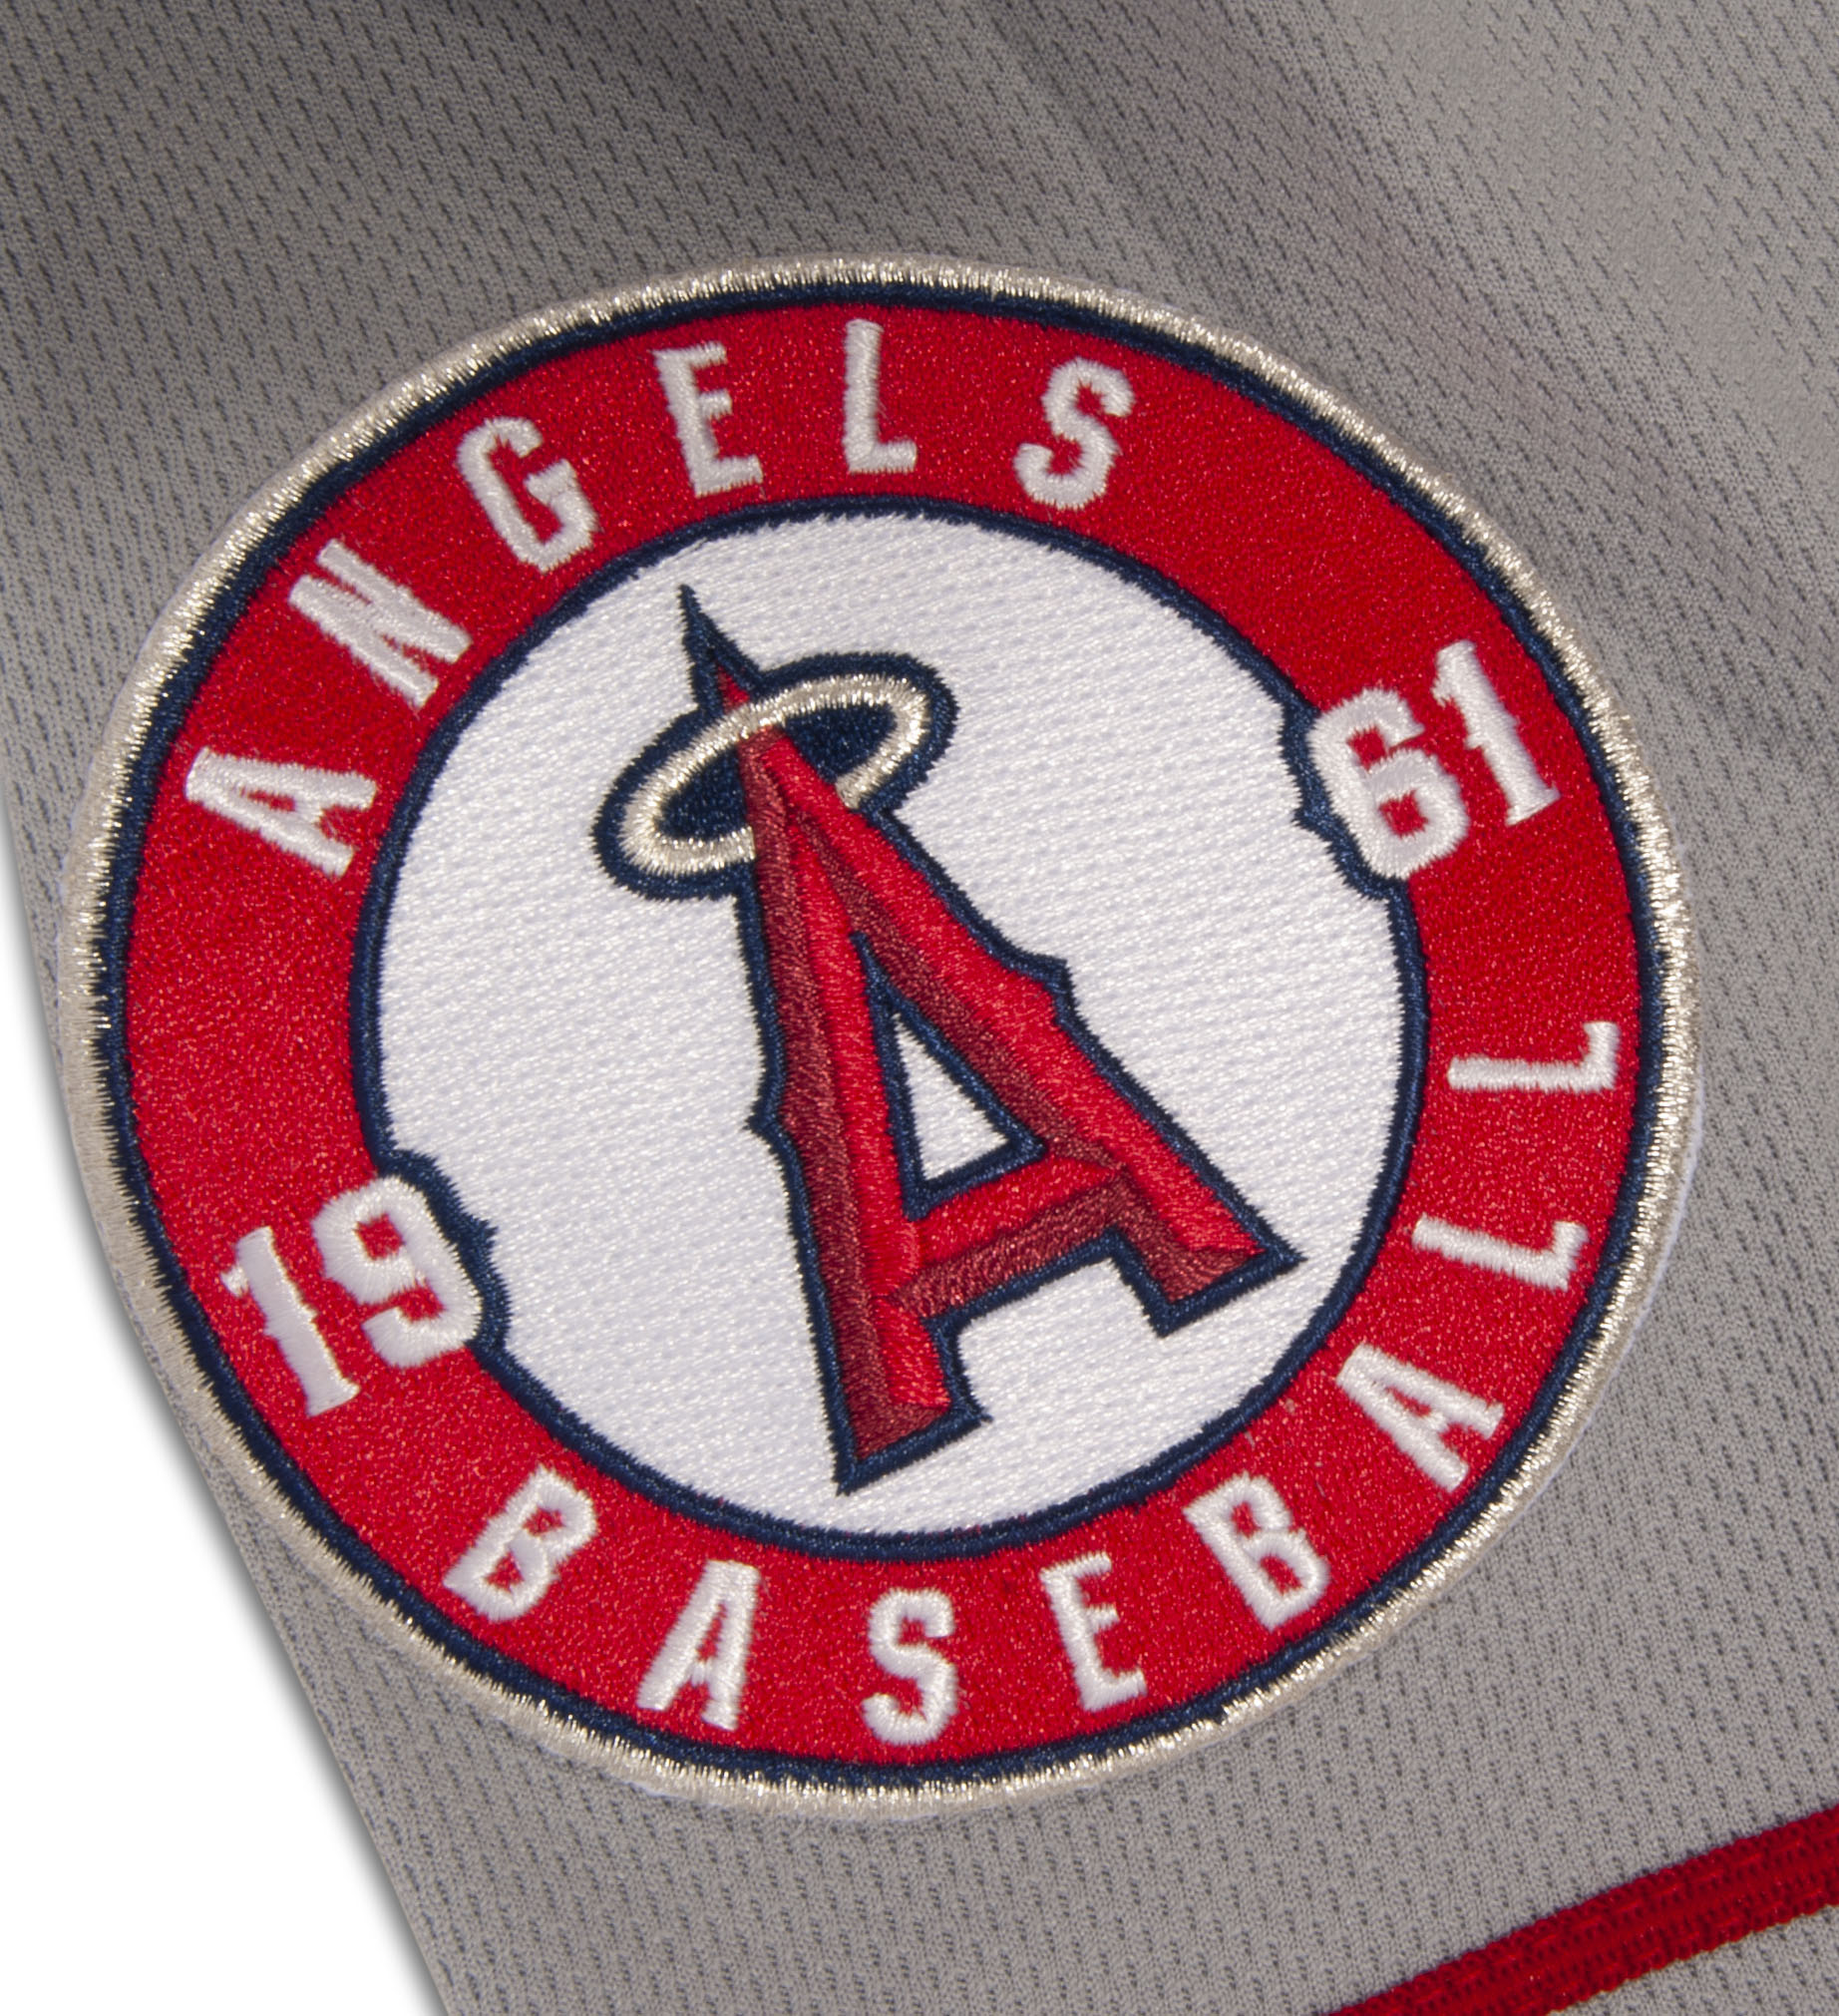 MIKE TROUT Autographed Los Angeles Angels Nike Authentic White Jersey MLB  AUTH. - Game Day Legends